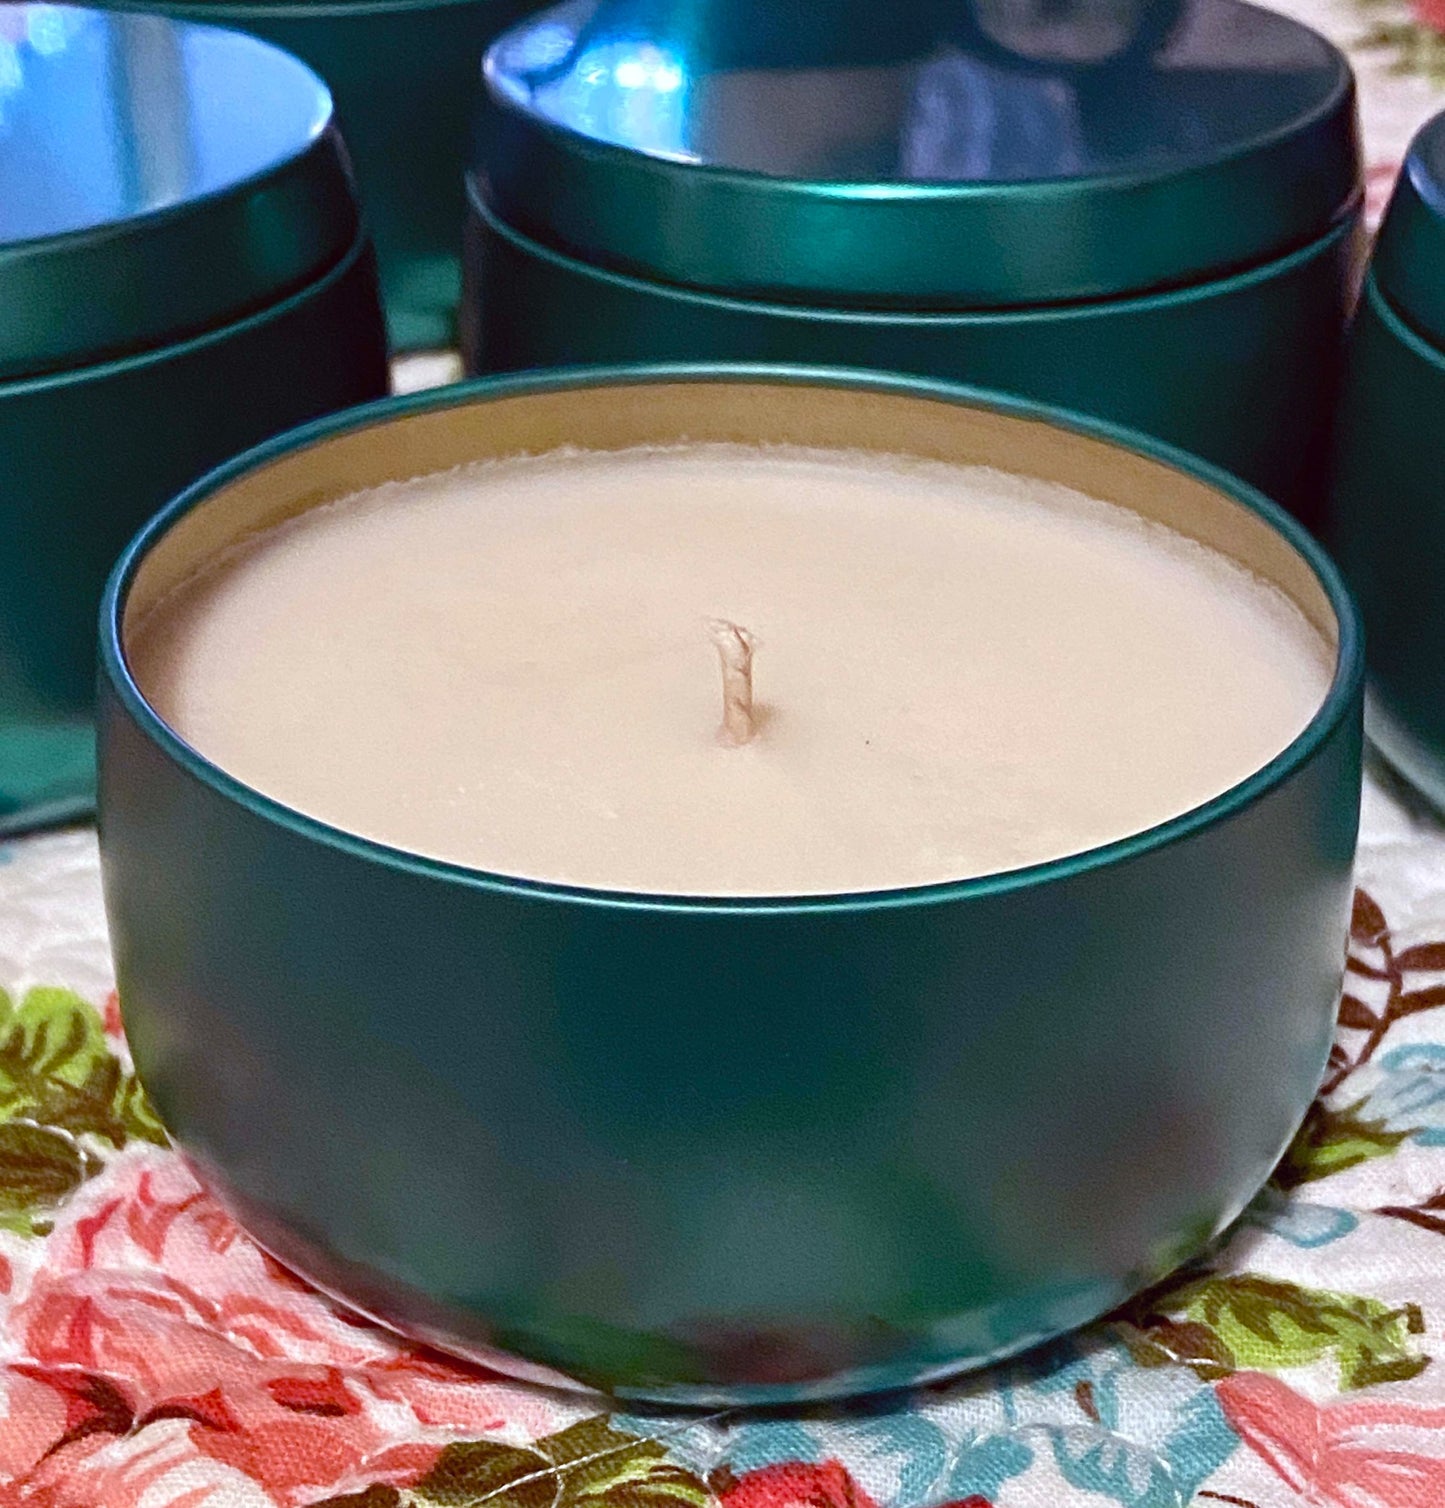 Fraser Fir hand-poured soy candle in teal tin with no cover